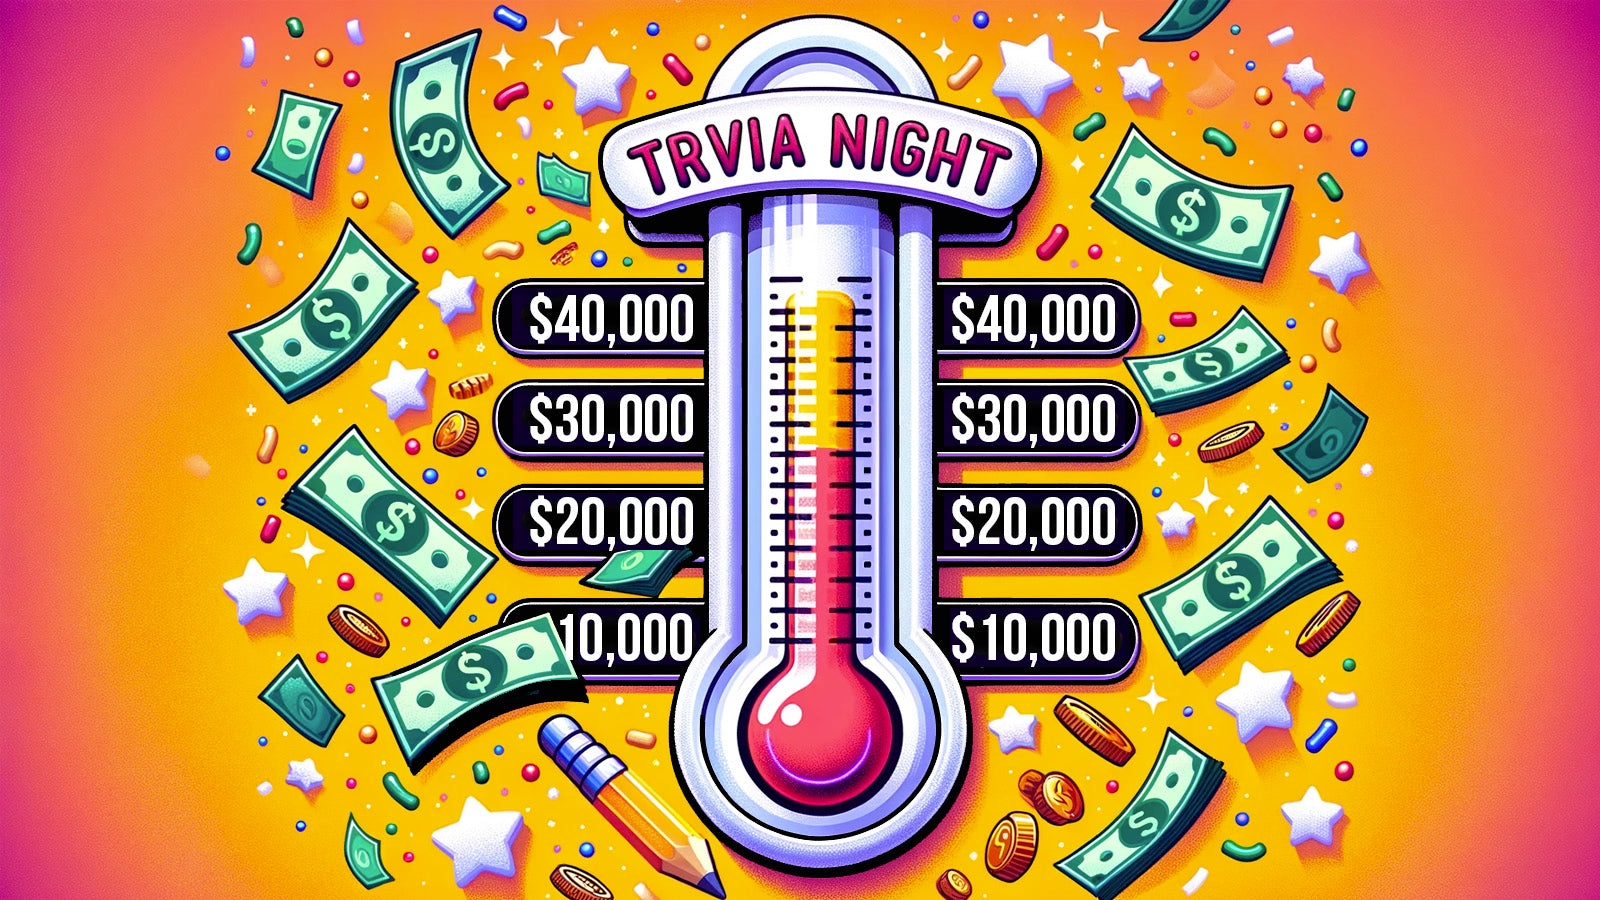 10 Ways to Raise Extra Money With Your Trivia Night Fundraiser